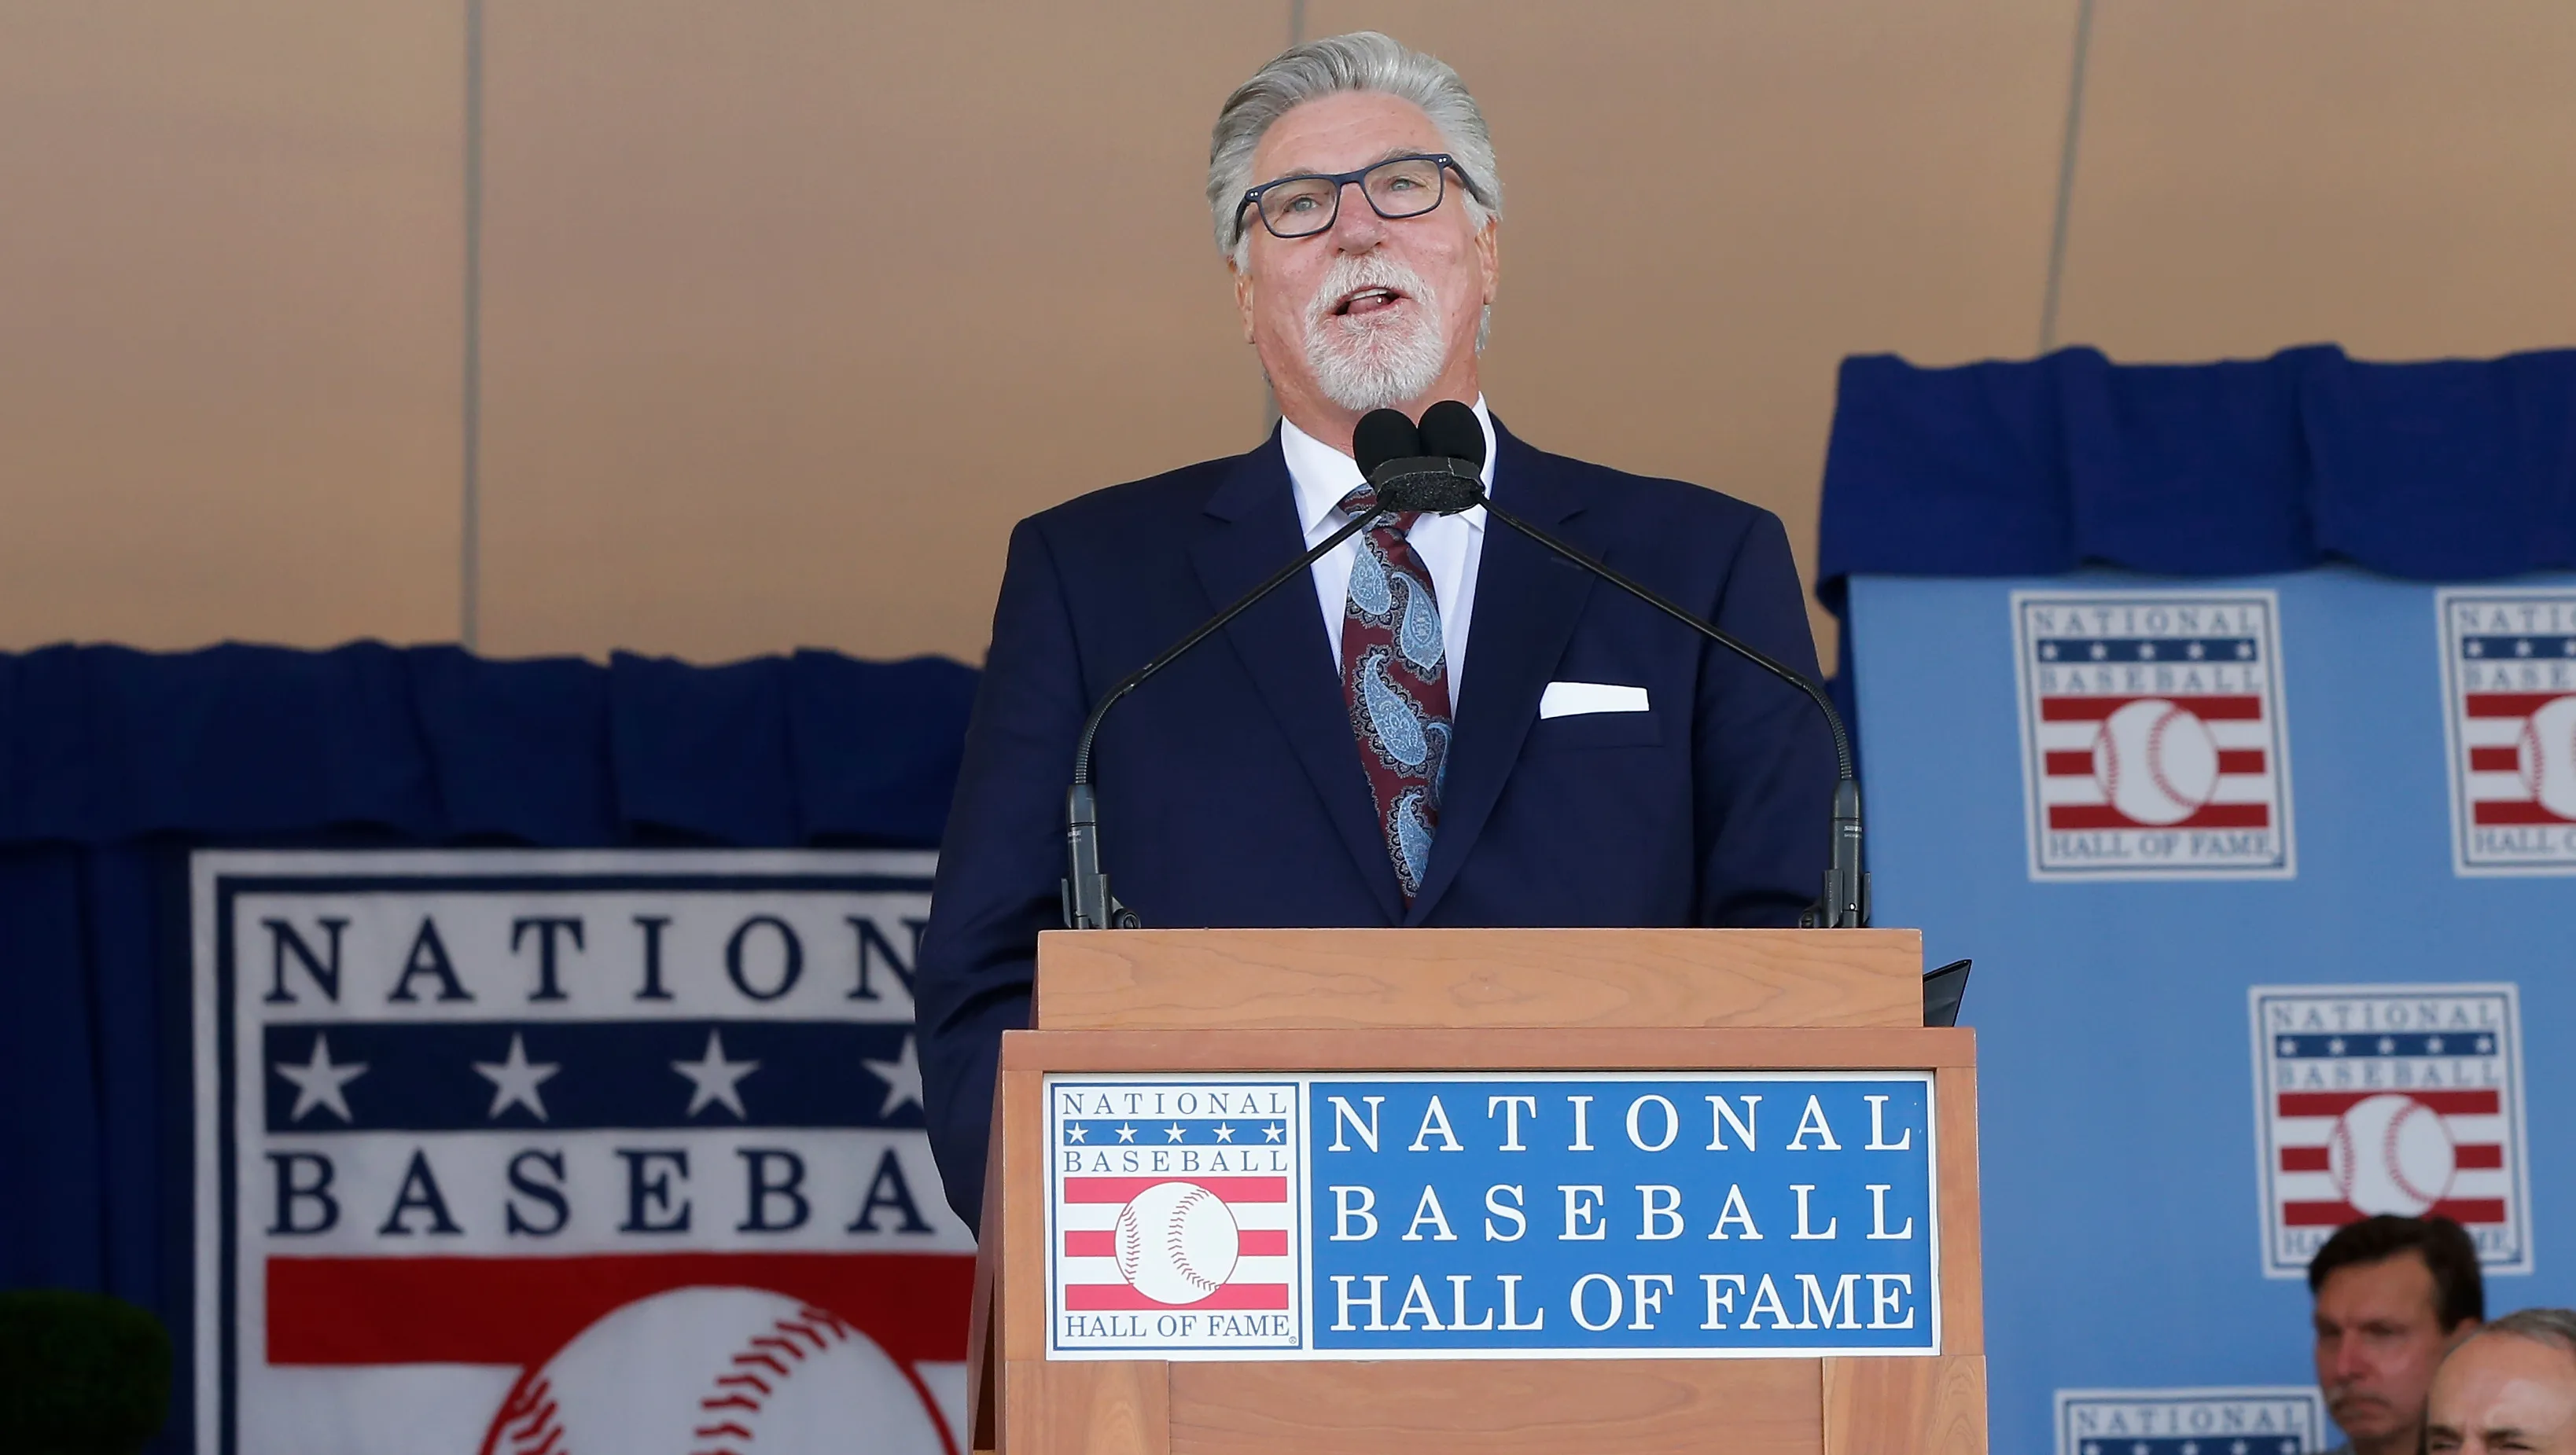 Jack Morrics giving his speech during the Baseball Hall of Fame induction ceremony in 2018